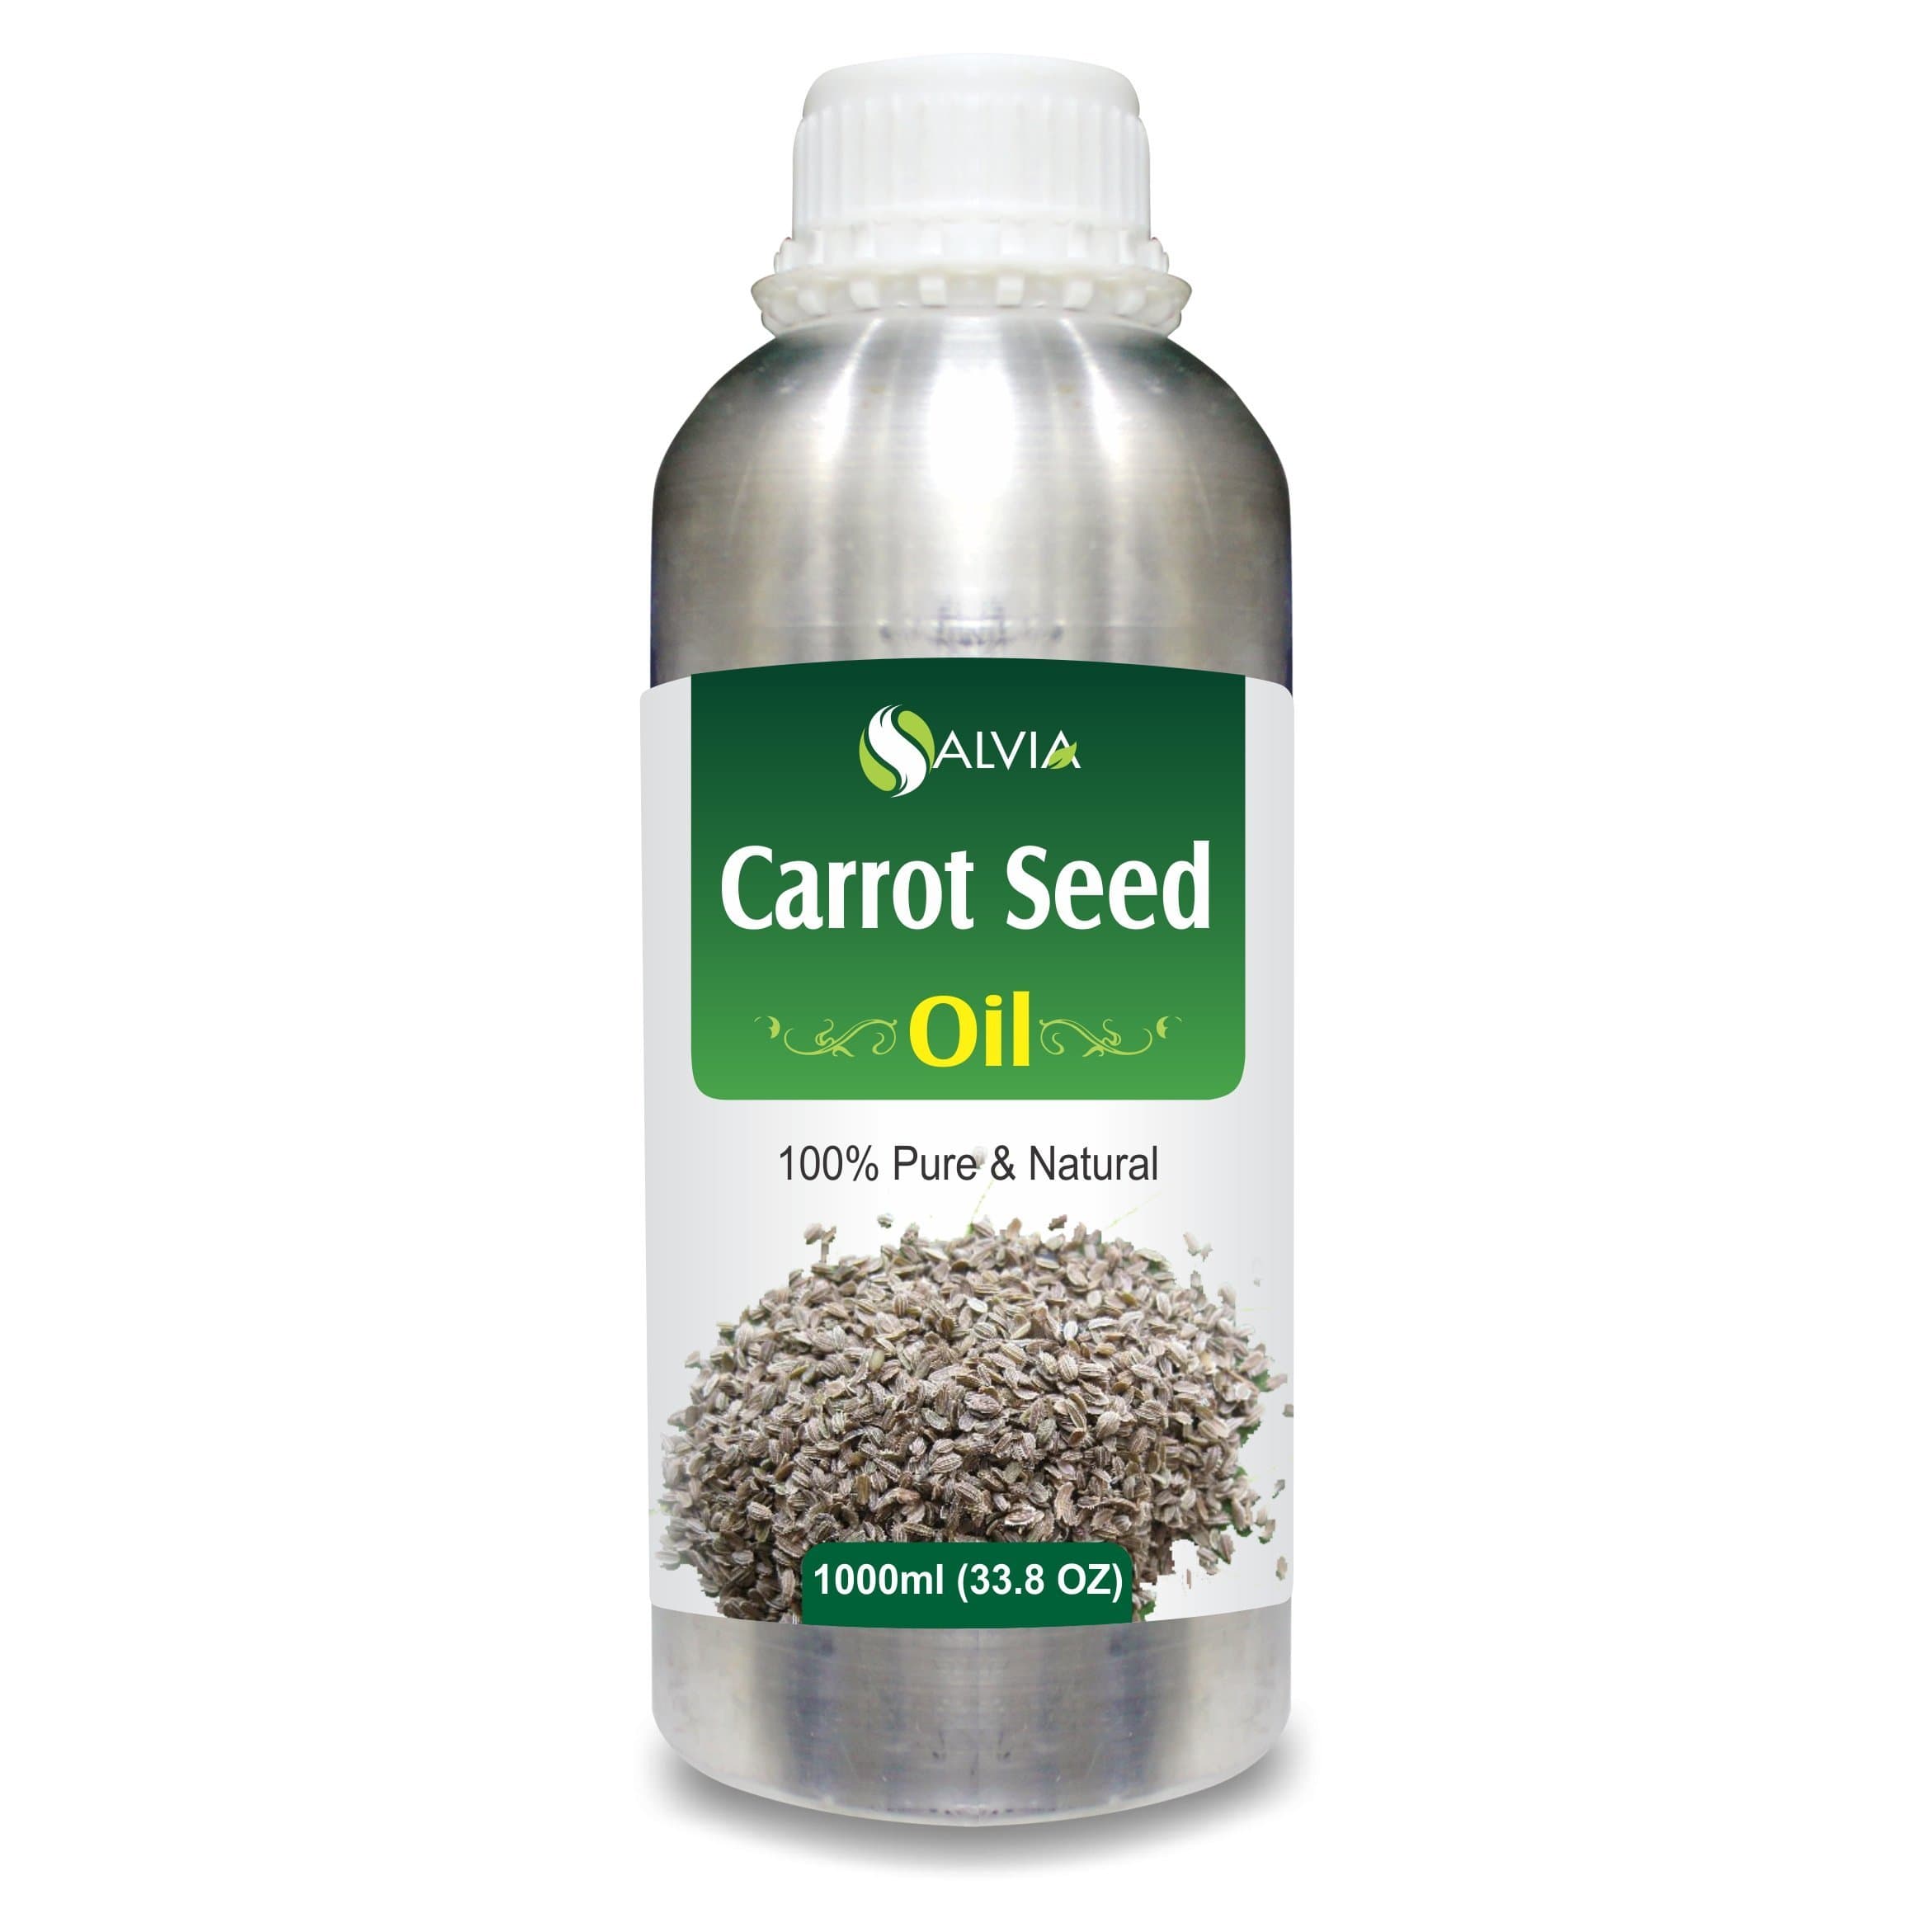 Carrot Seed Oil and Its Uses